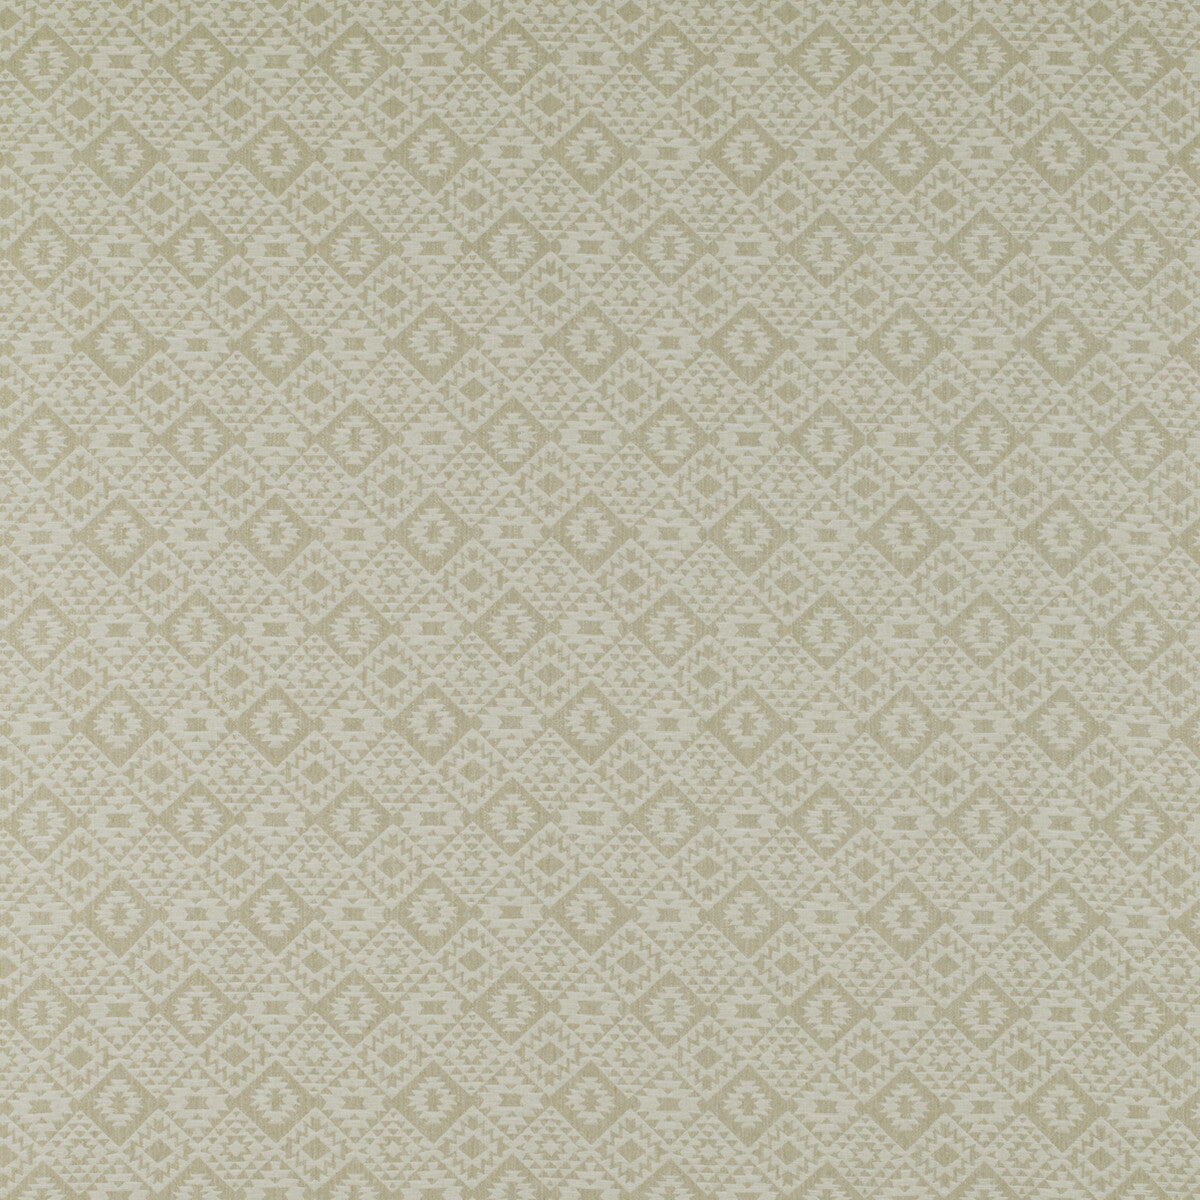 Lecco fabric in blanco color - pattern GDT5323.003.0 - by Gaston y Daniela in the Tierras collection